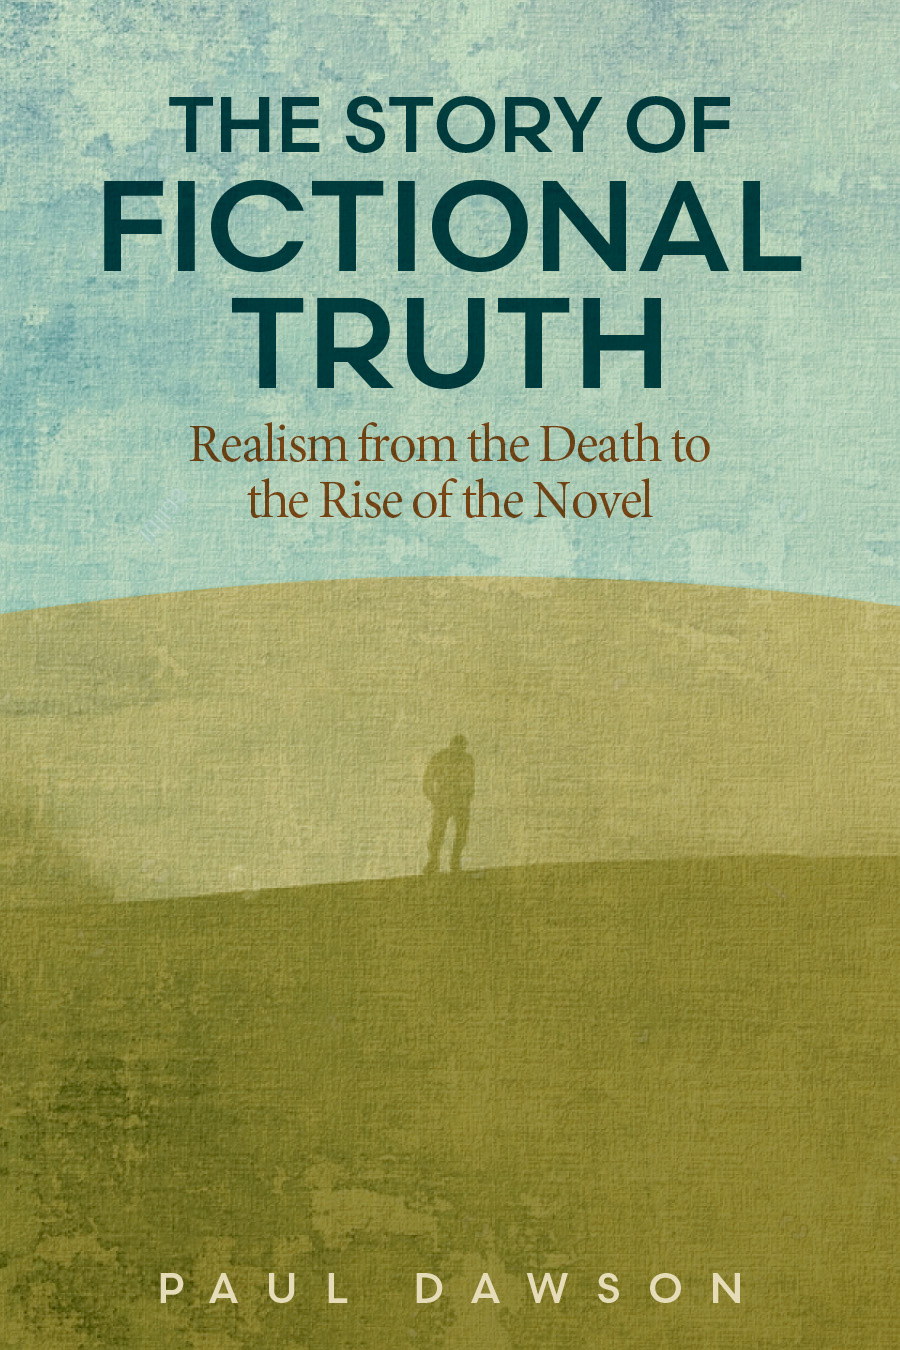 Front cover of The Story of Fictional Truth: Realism from the Death to the Rise of the Novel by Paul Dawson, featuring a lone figure standing on a hillside against a faded blue sky.